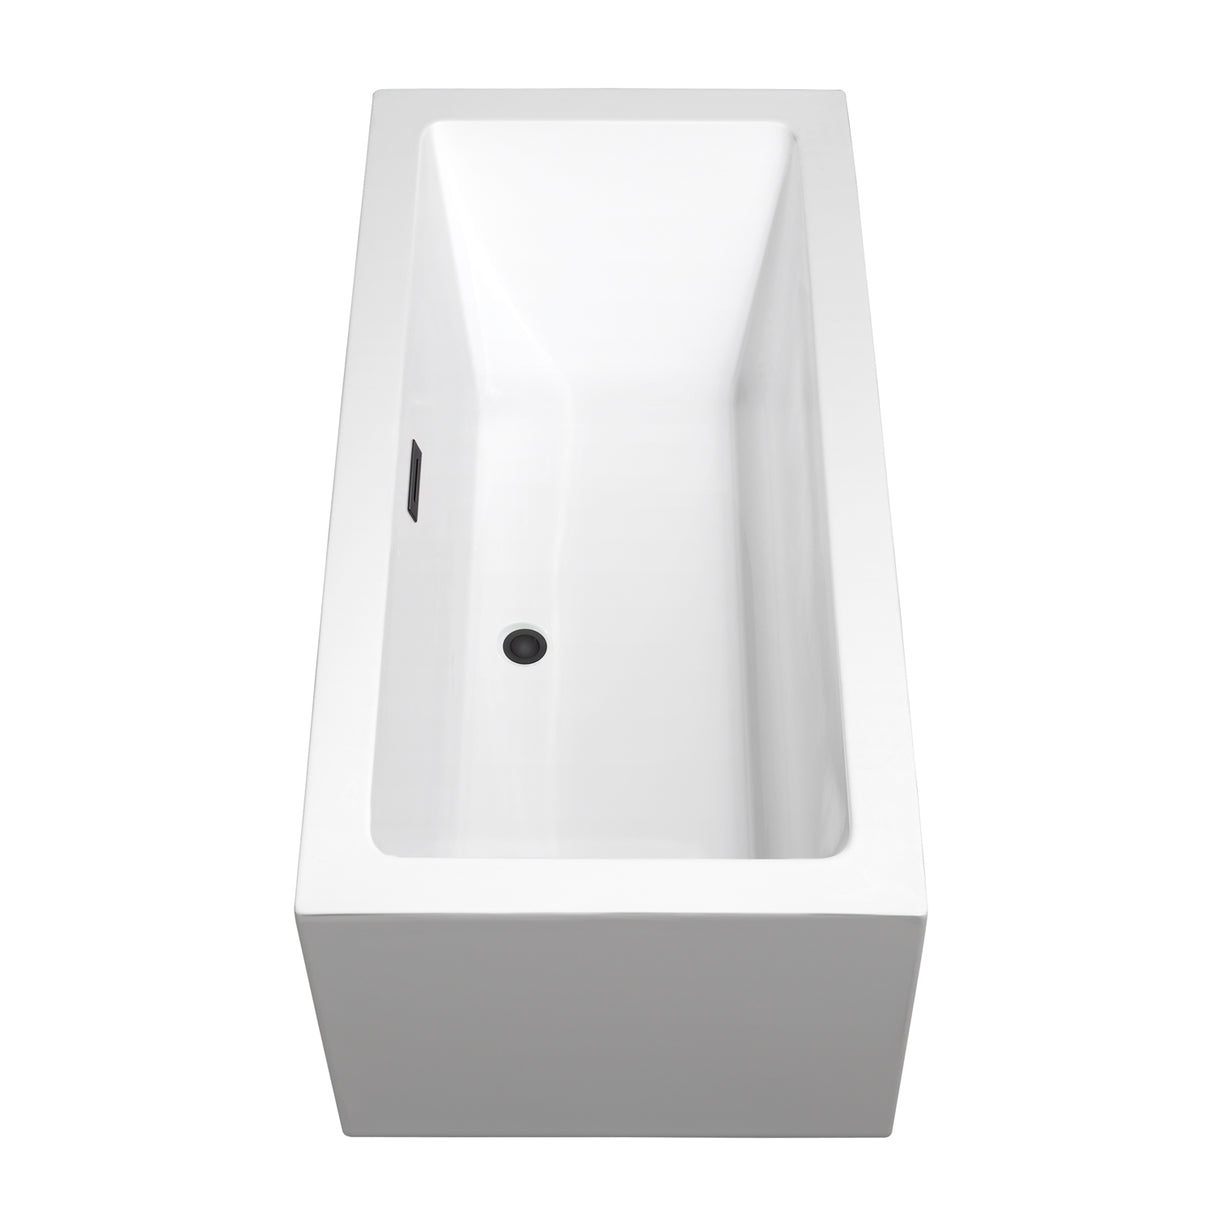 Melody 60 Inch Freestanding Bathtub in White with Matte Black Drain and Overflow Trim